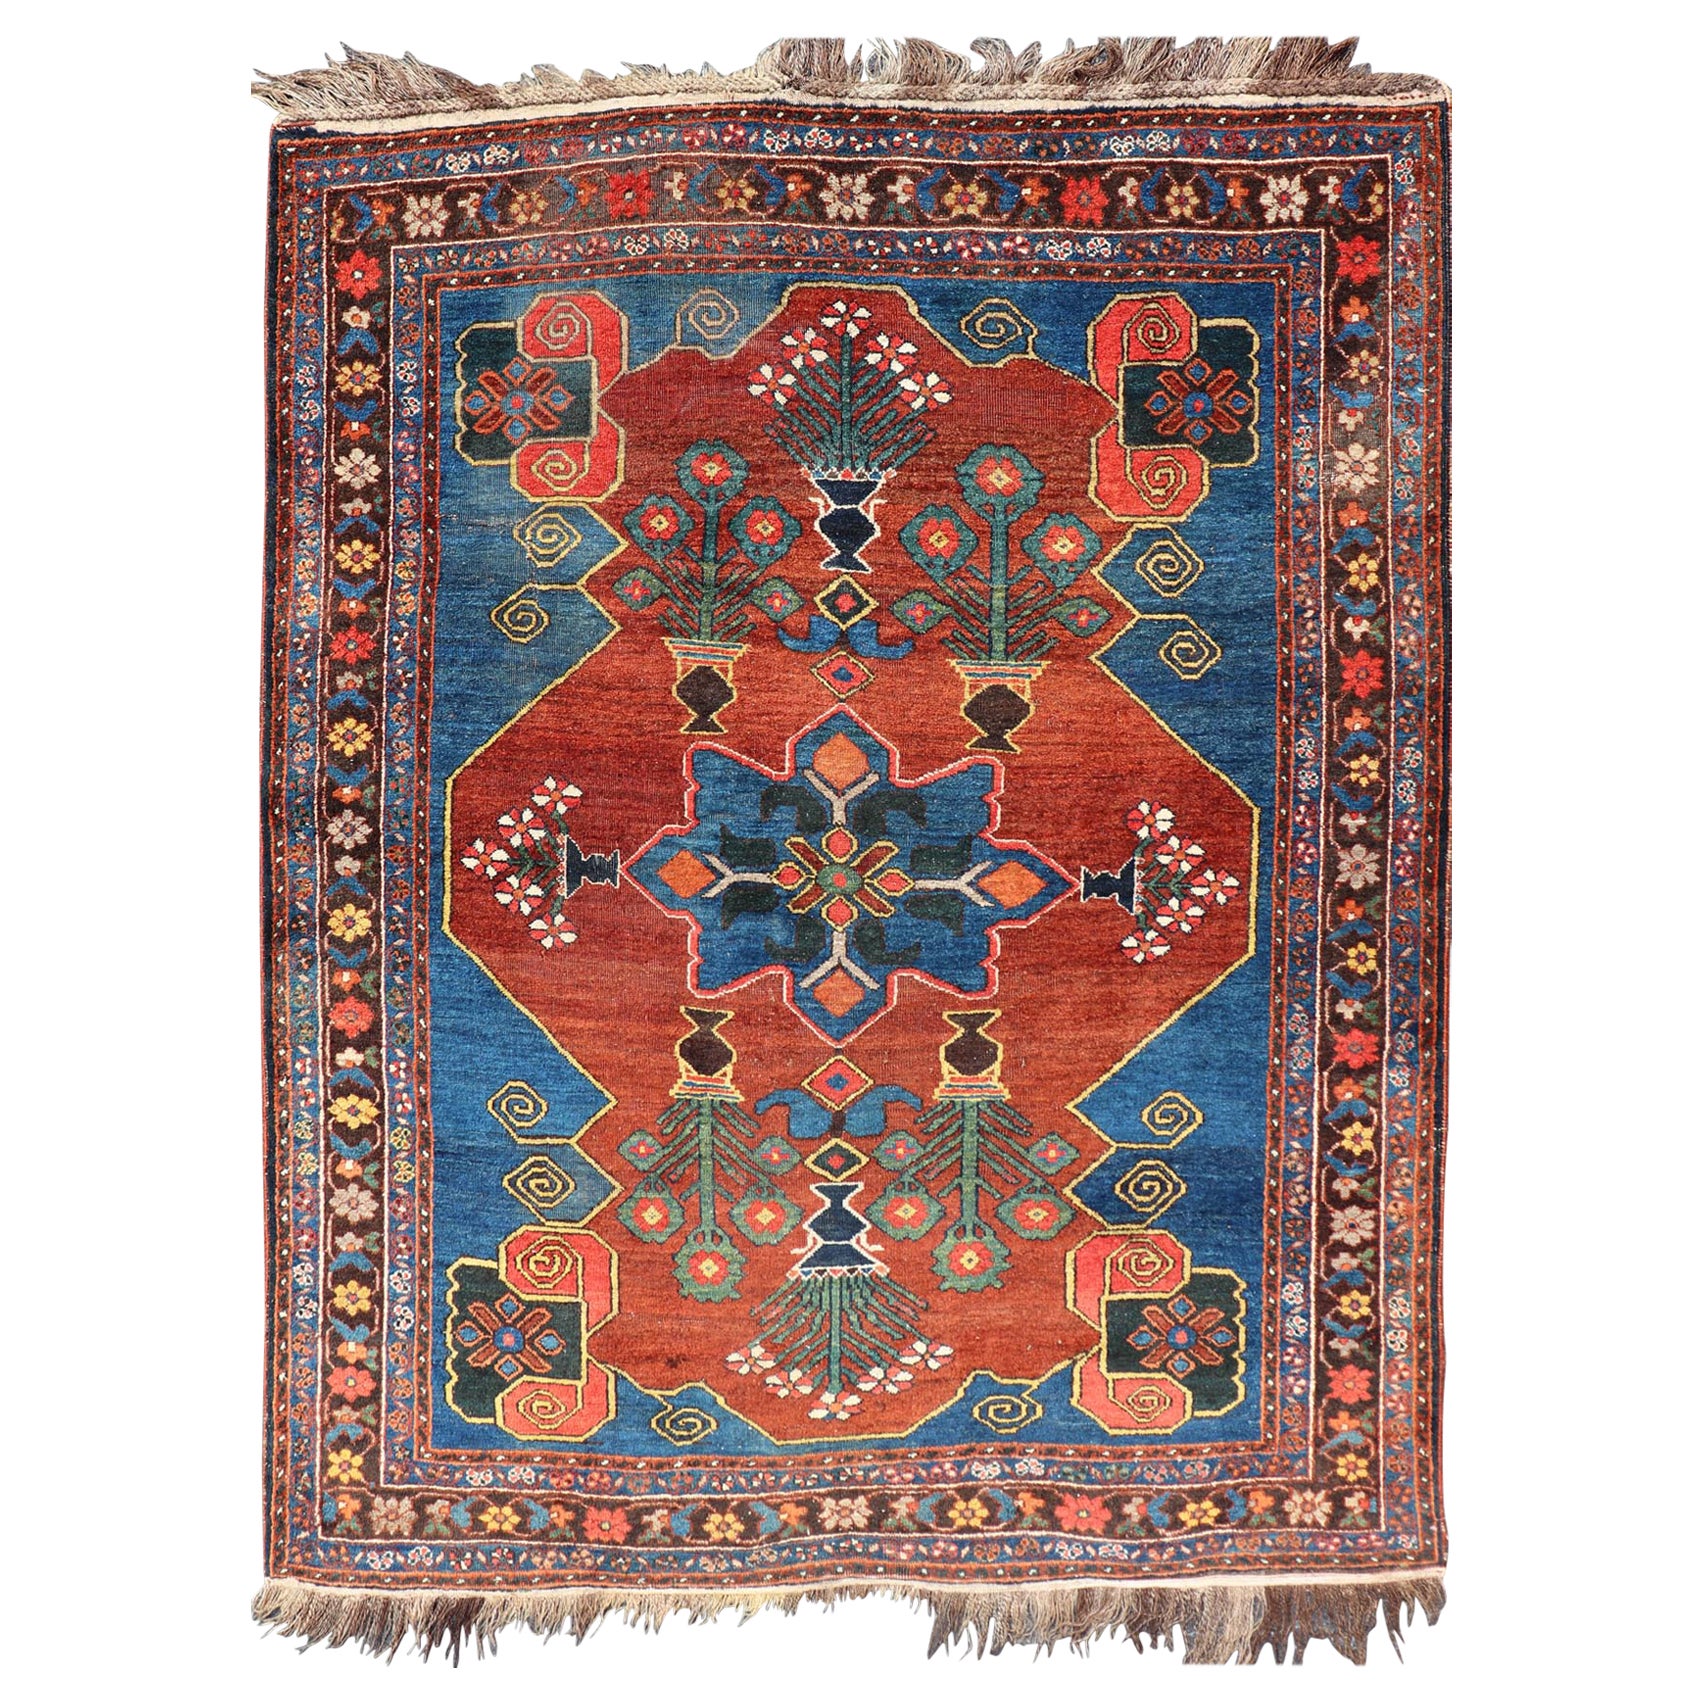 Antique N.W. Persian Rug with Geometrics in Terracotta Red, Royal Blue & Green